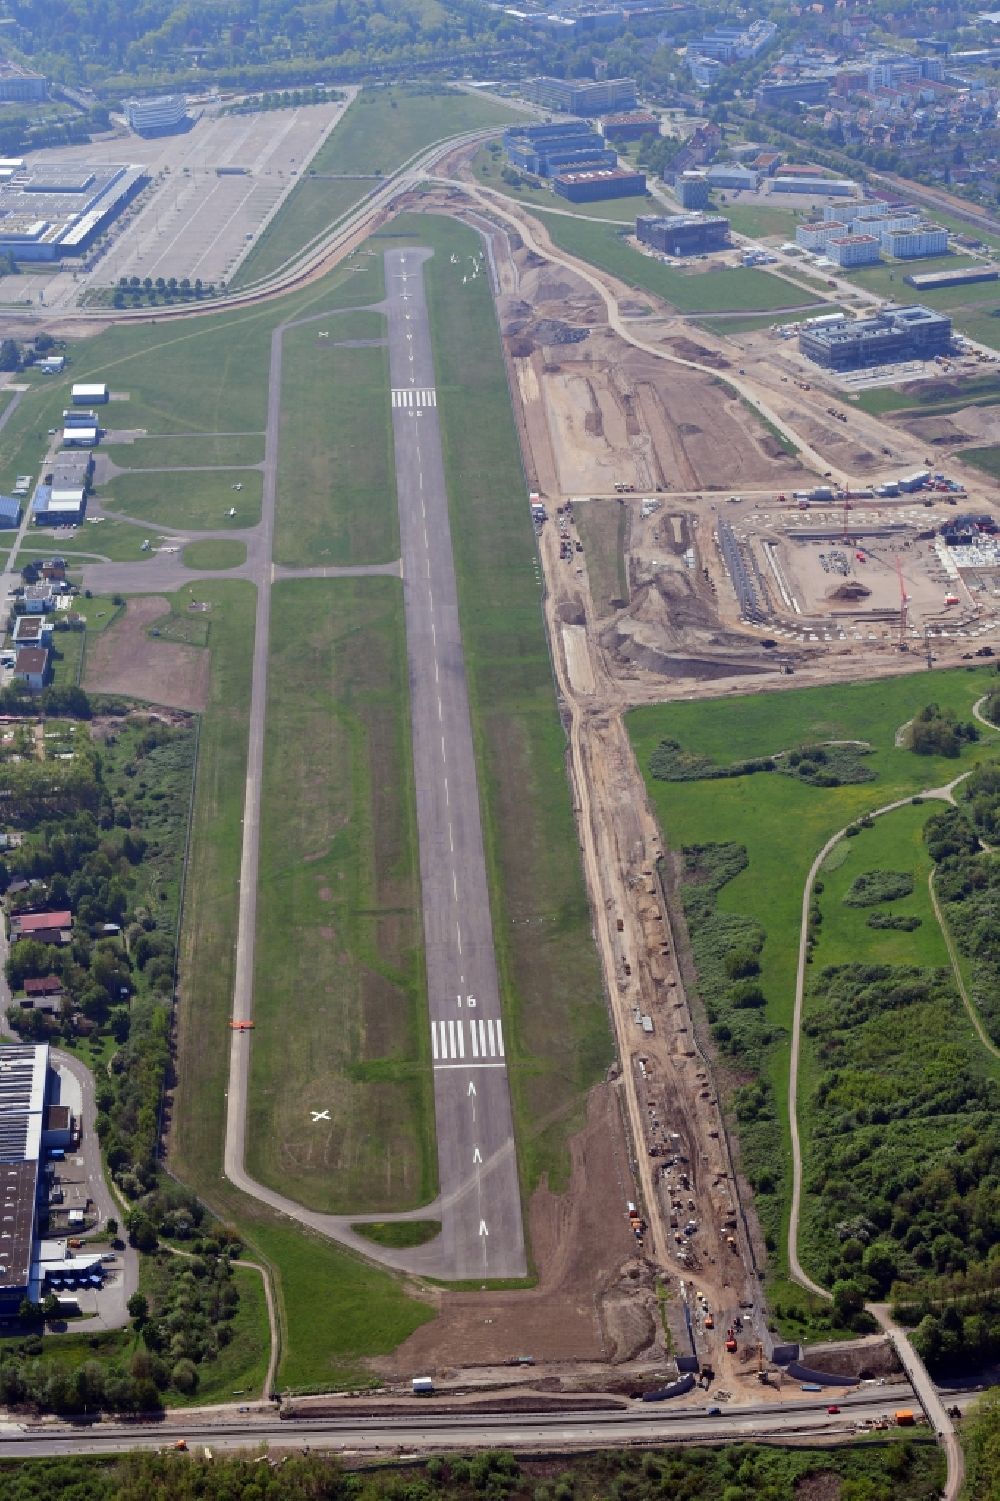 Aerial image Freiburg im Breisgau - Runway of airfield EDTF in Freiburg im Breisgau in the state Baden-Wurttemberg, Germany. At the construction works area the new stadium of the SC Freiburg is built